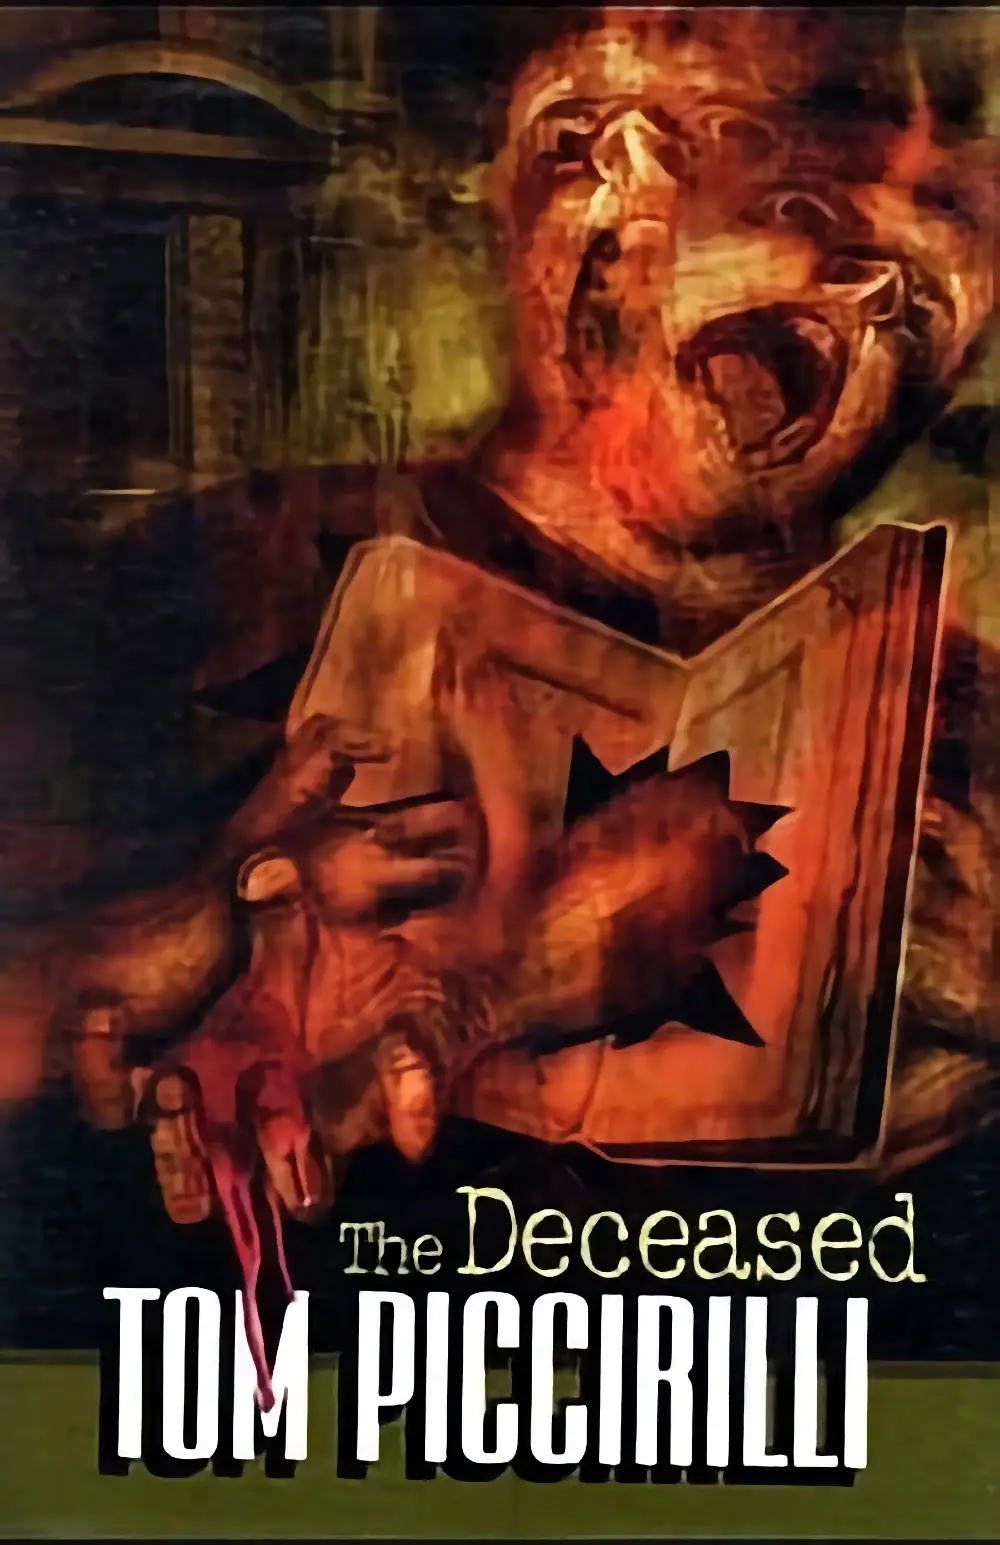 The Deceased by Tom Piccirilli